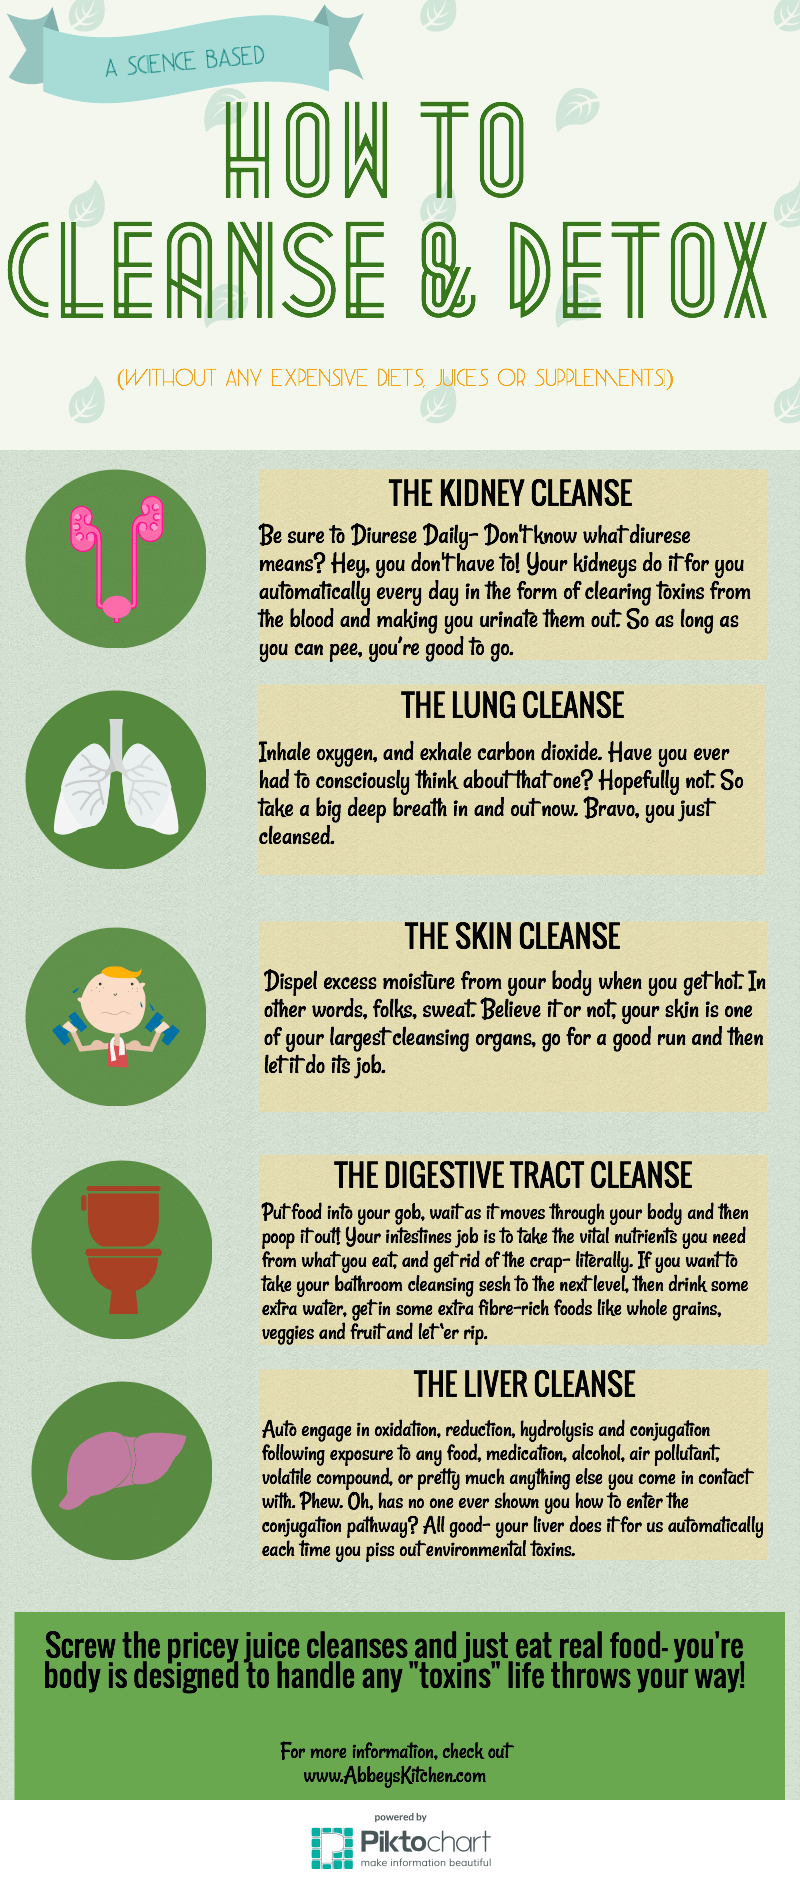 Science Based Detox Cleanse Tips & Infographic